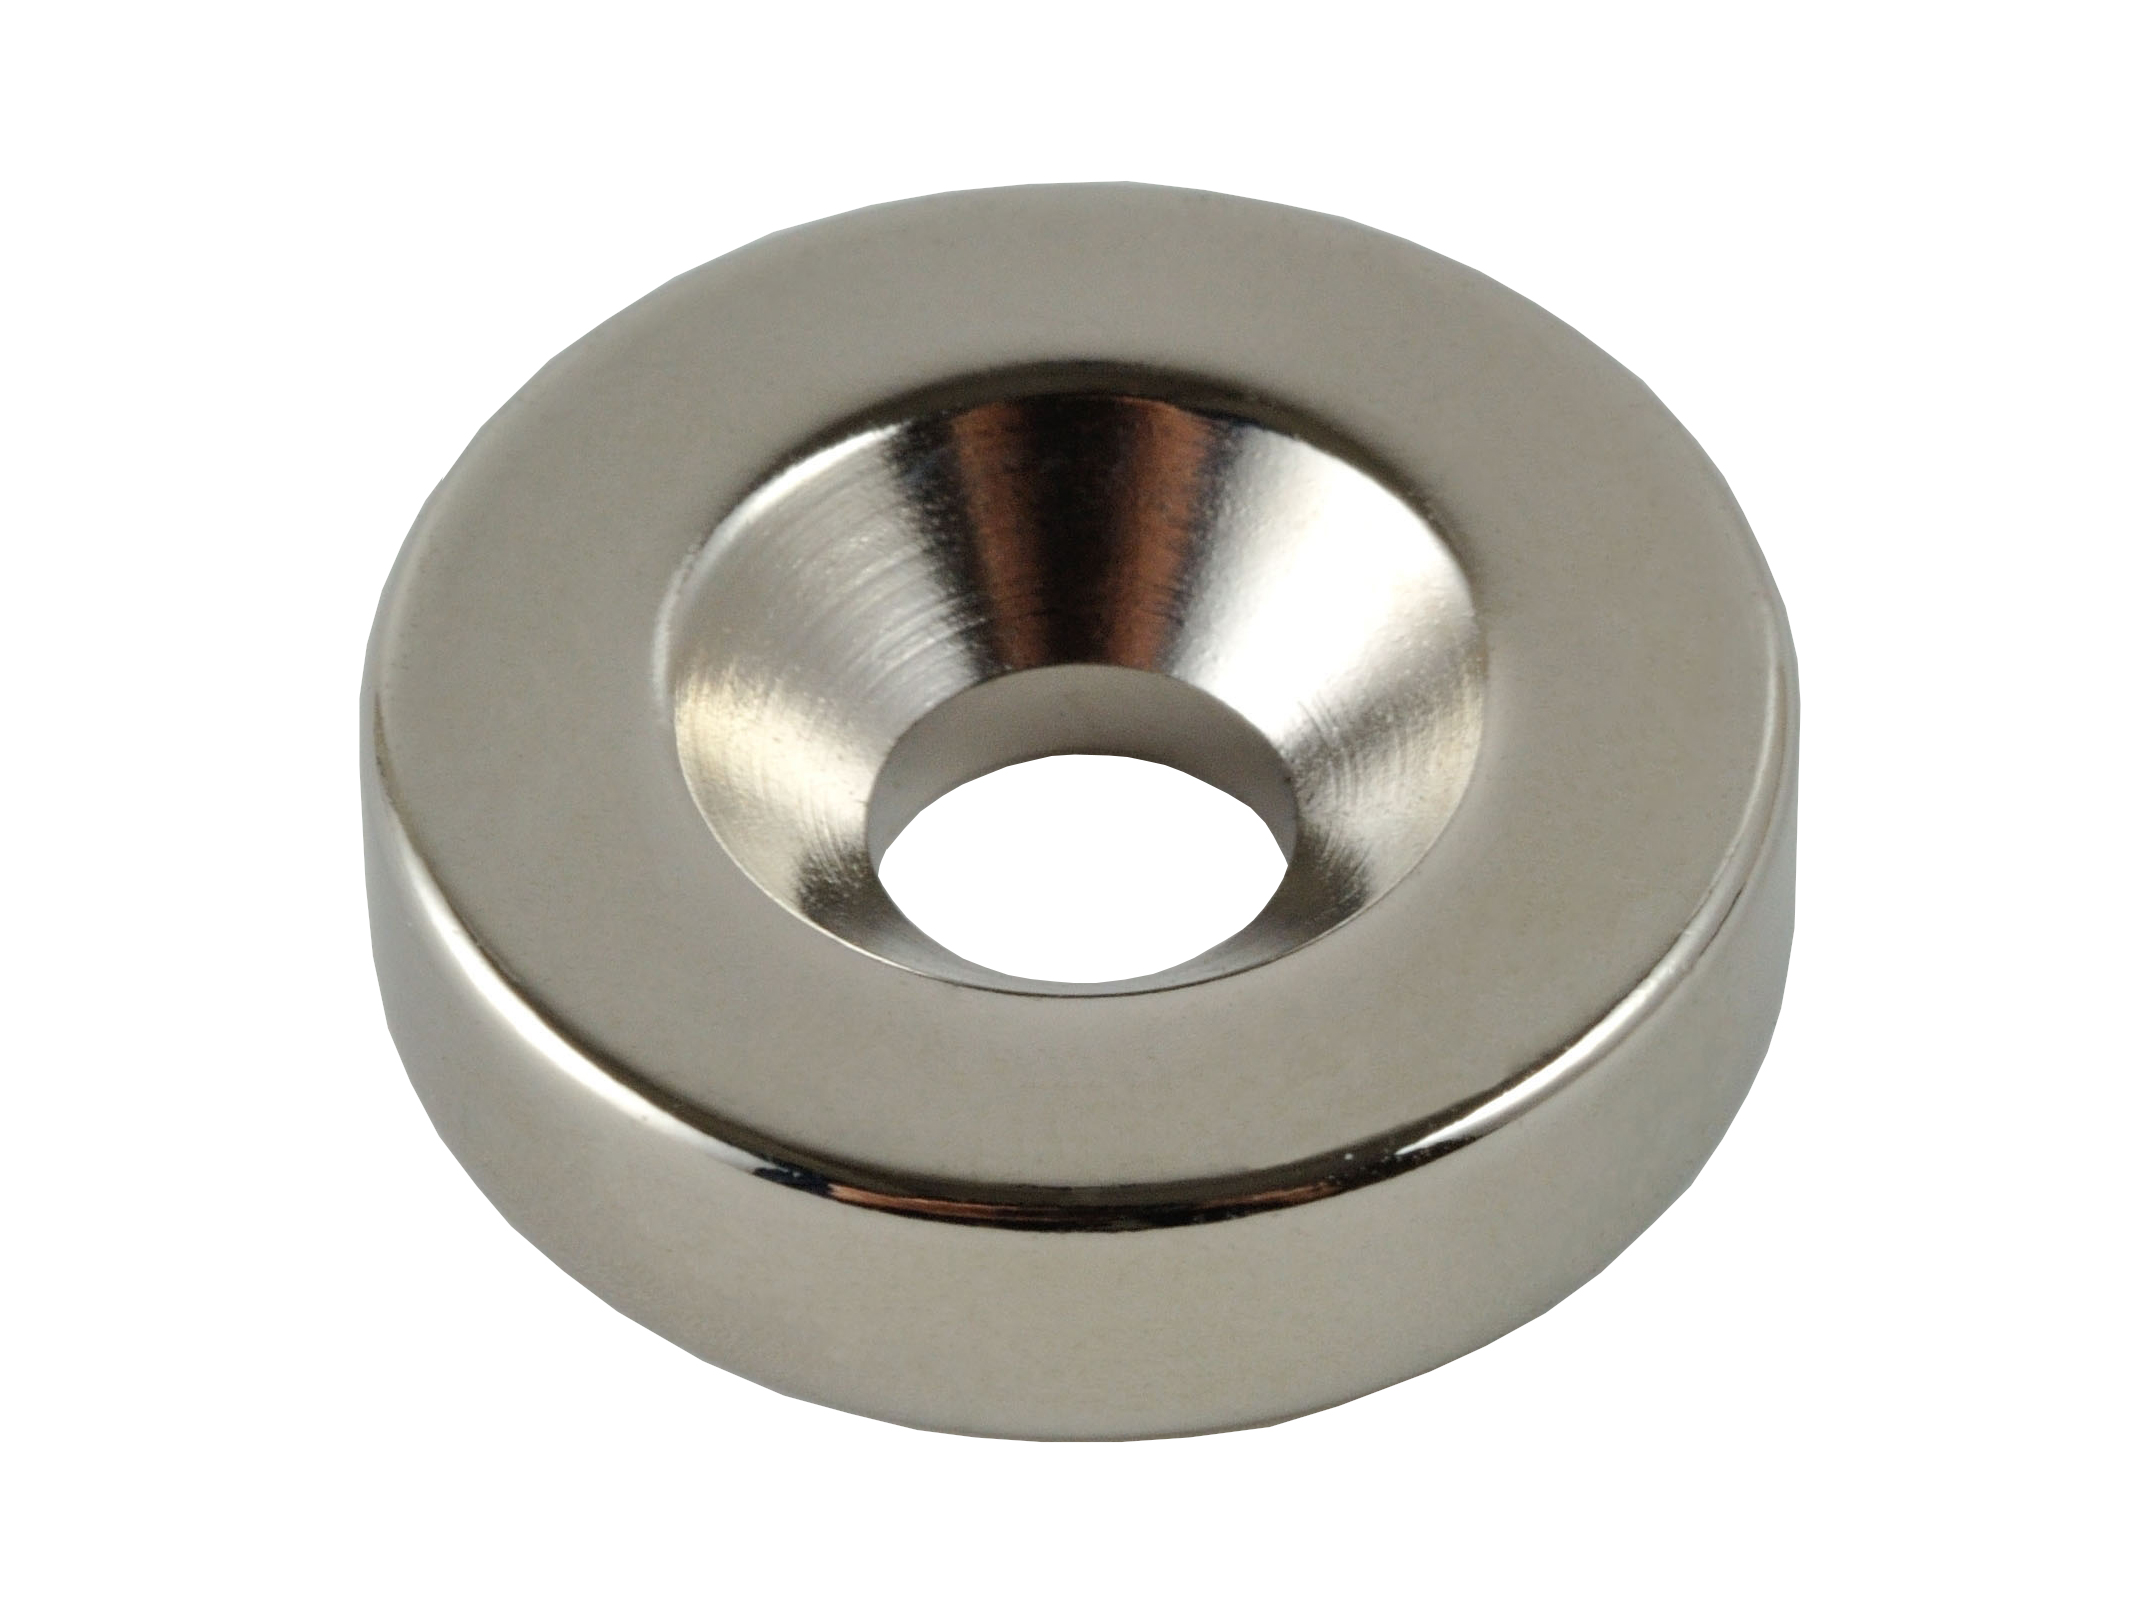 Cylindrical Neodymium Magnet With Countersunk Hole